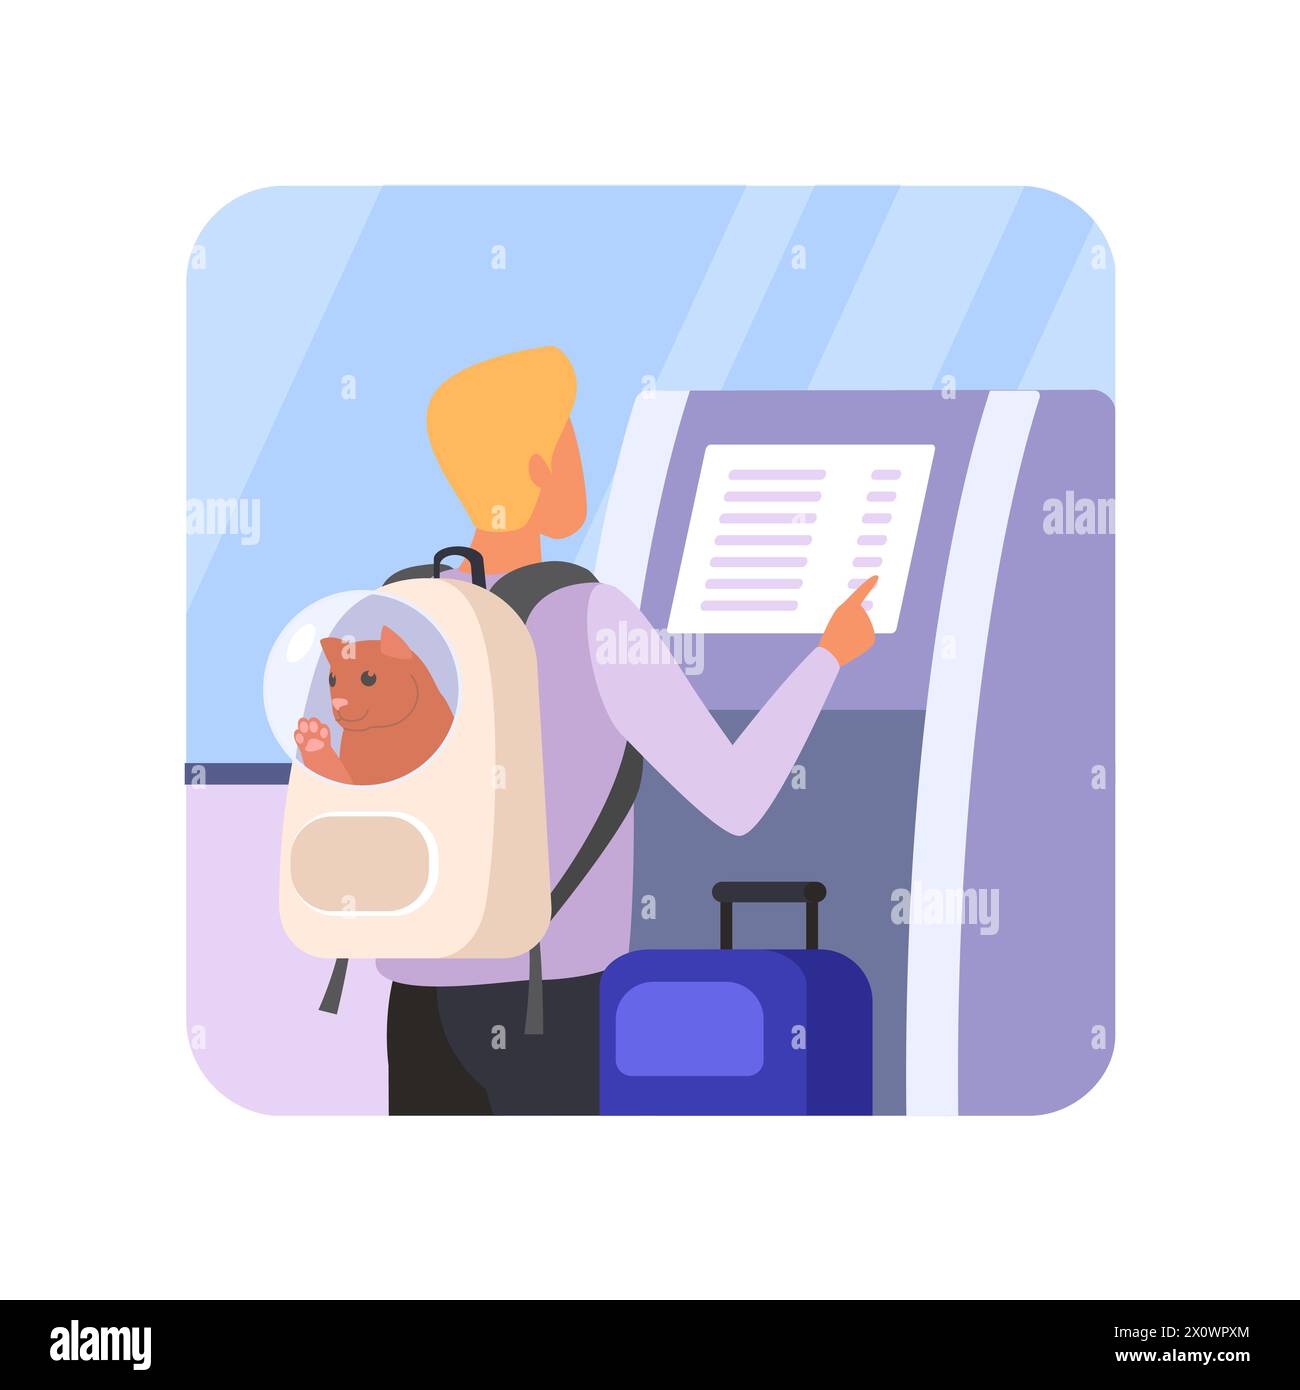 Man with cat in transparent backpack buying air plane tickets at self service kiosk, using check in machine vector illustration Stock Vector